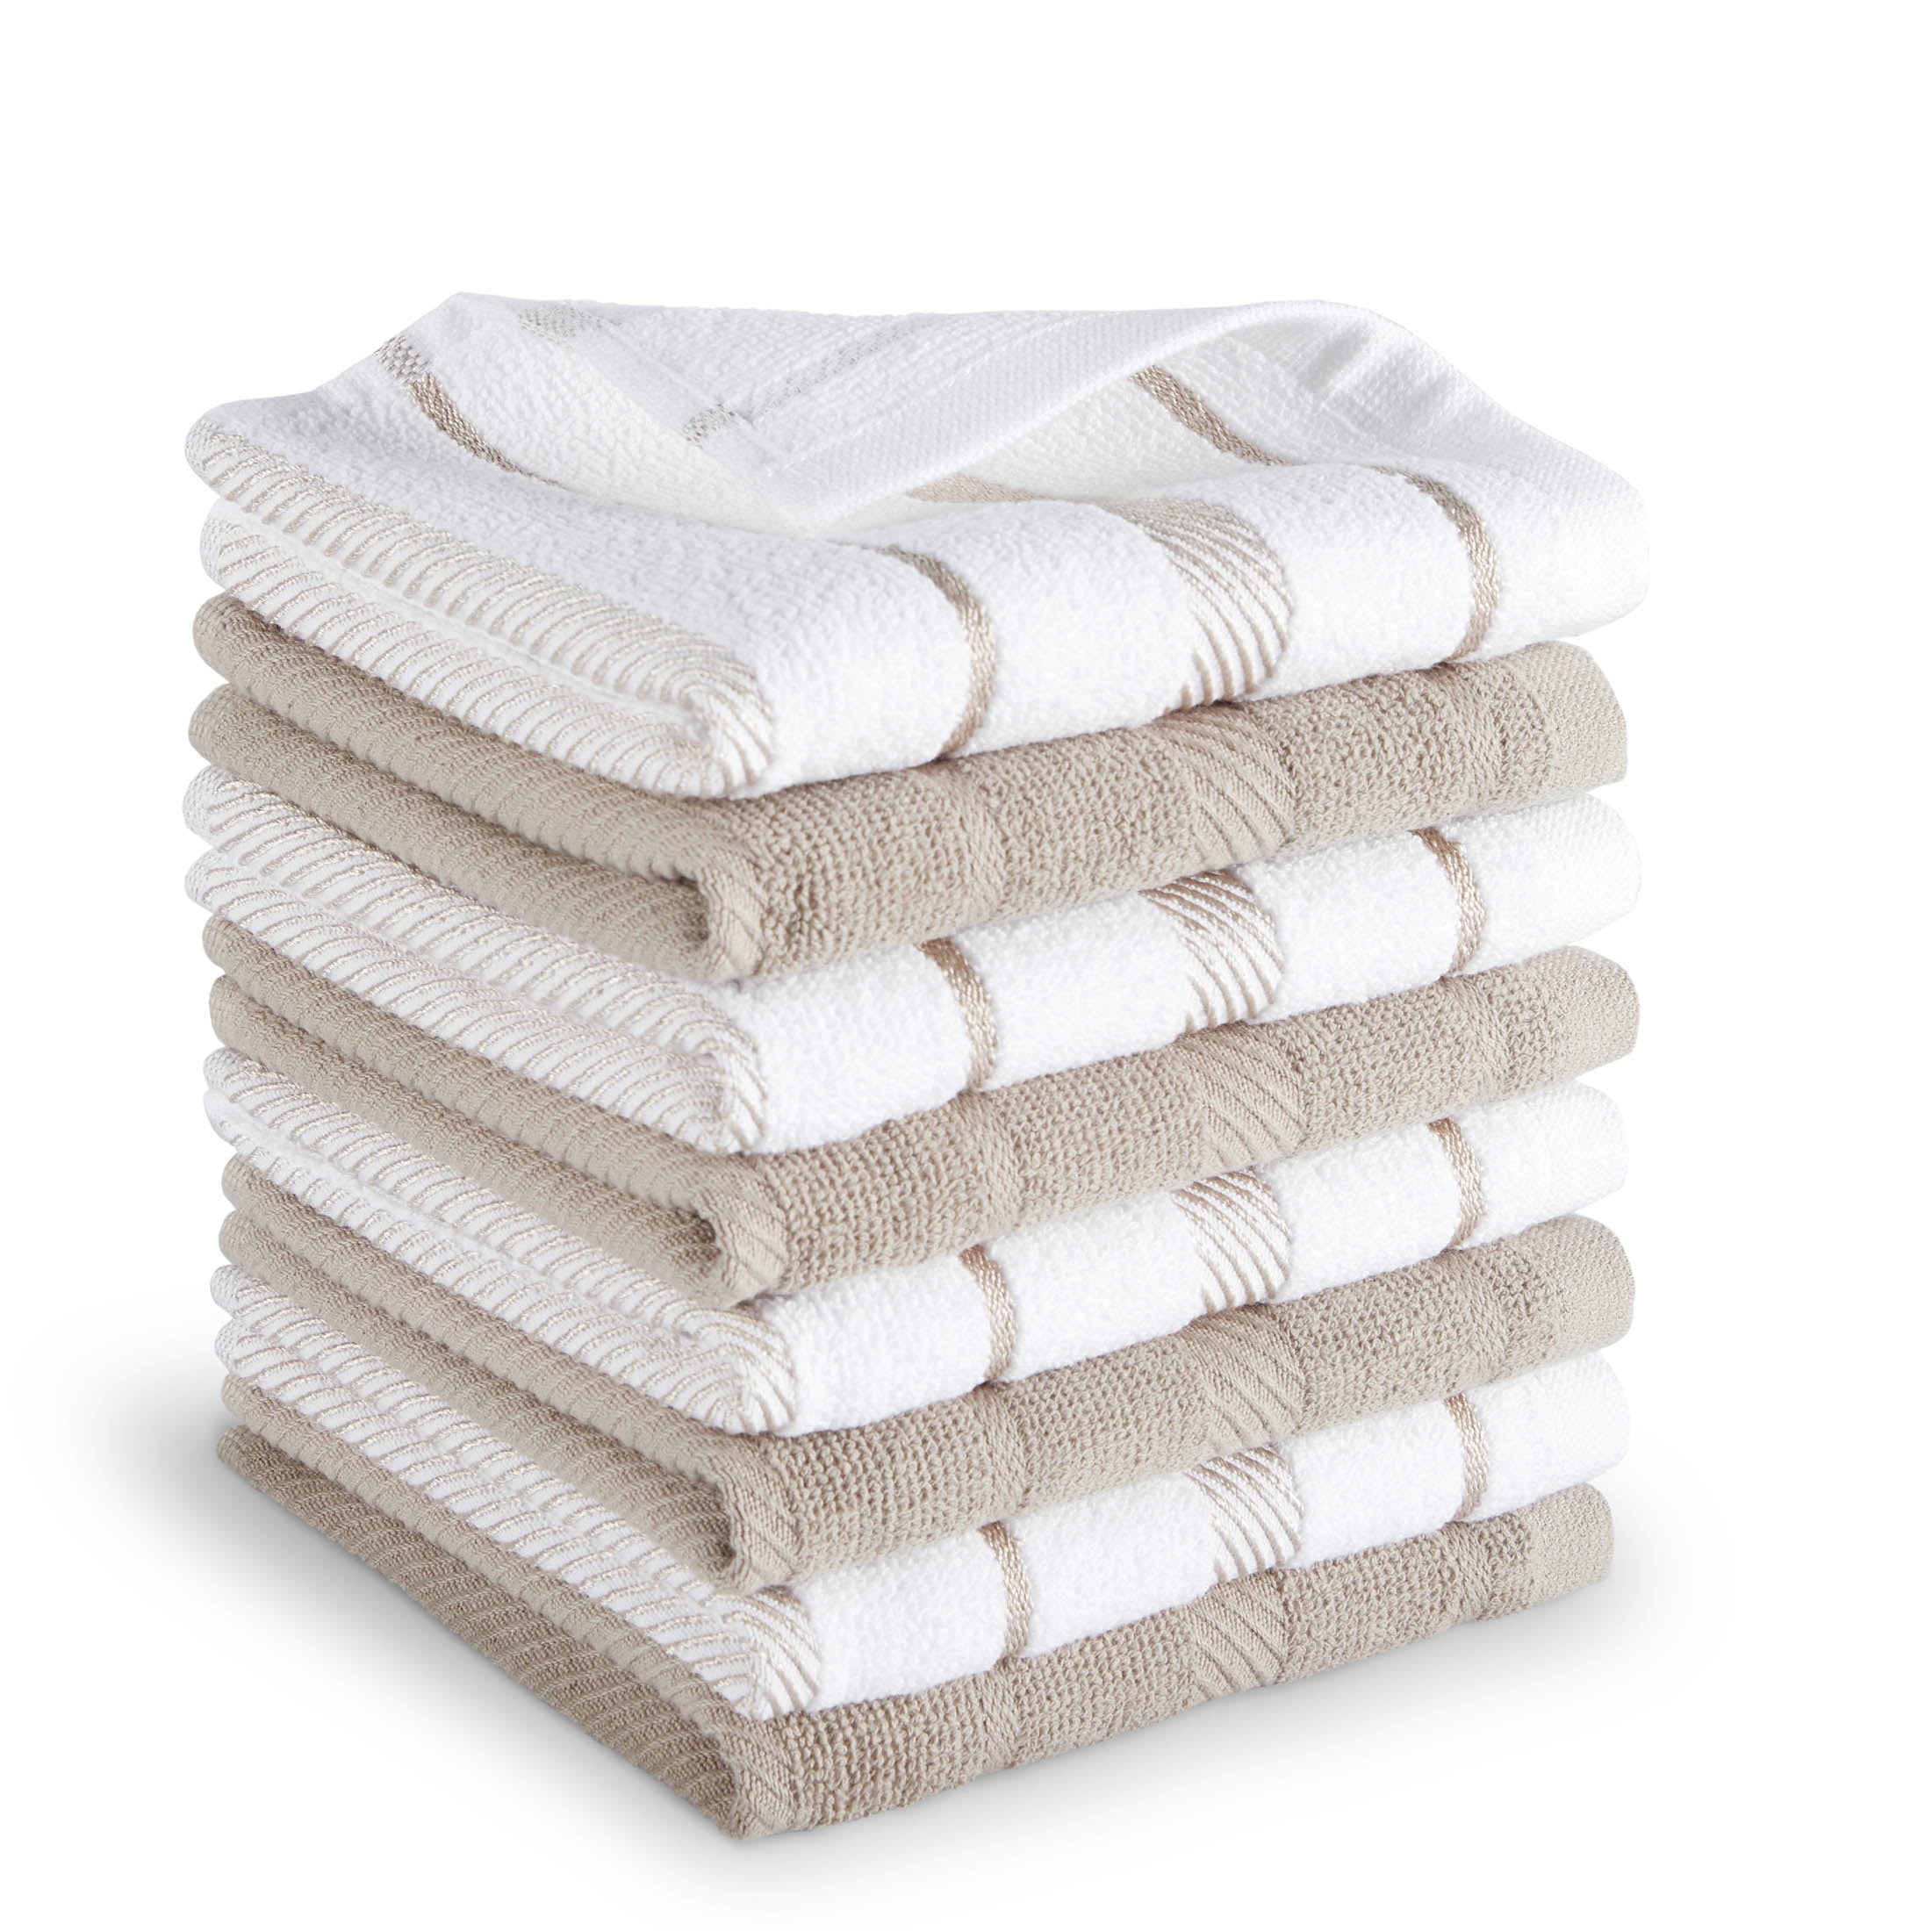 KitchenAid Antimicrobial treated Kitchen Towels, 8 Pack 17x28